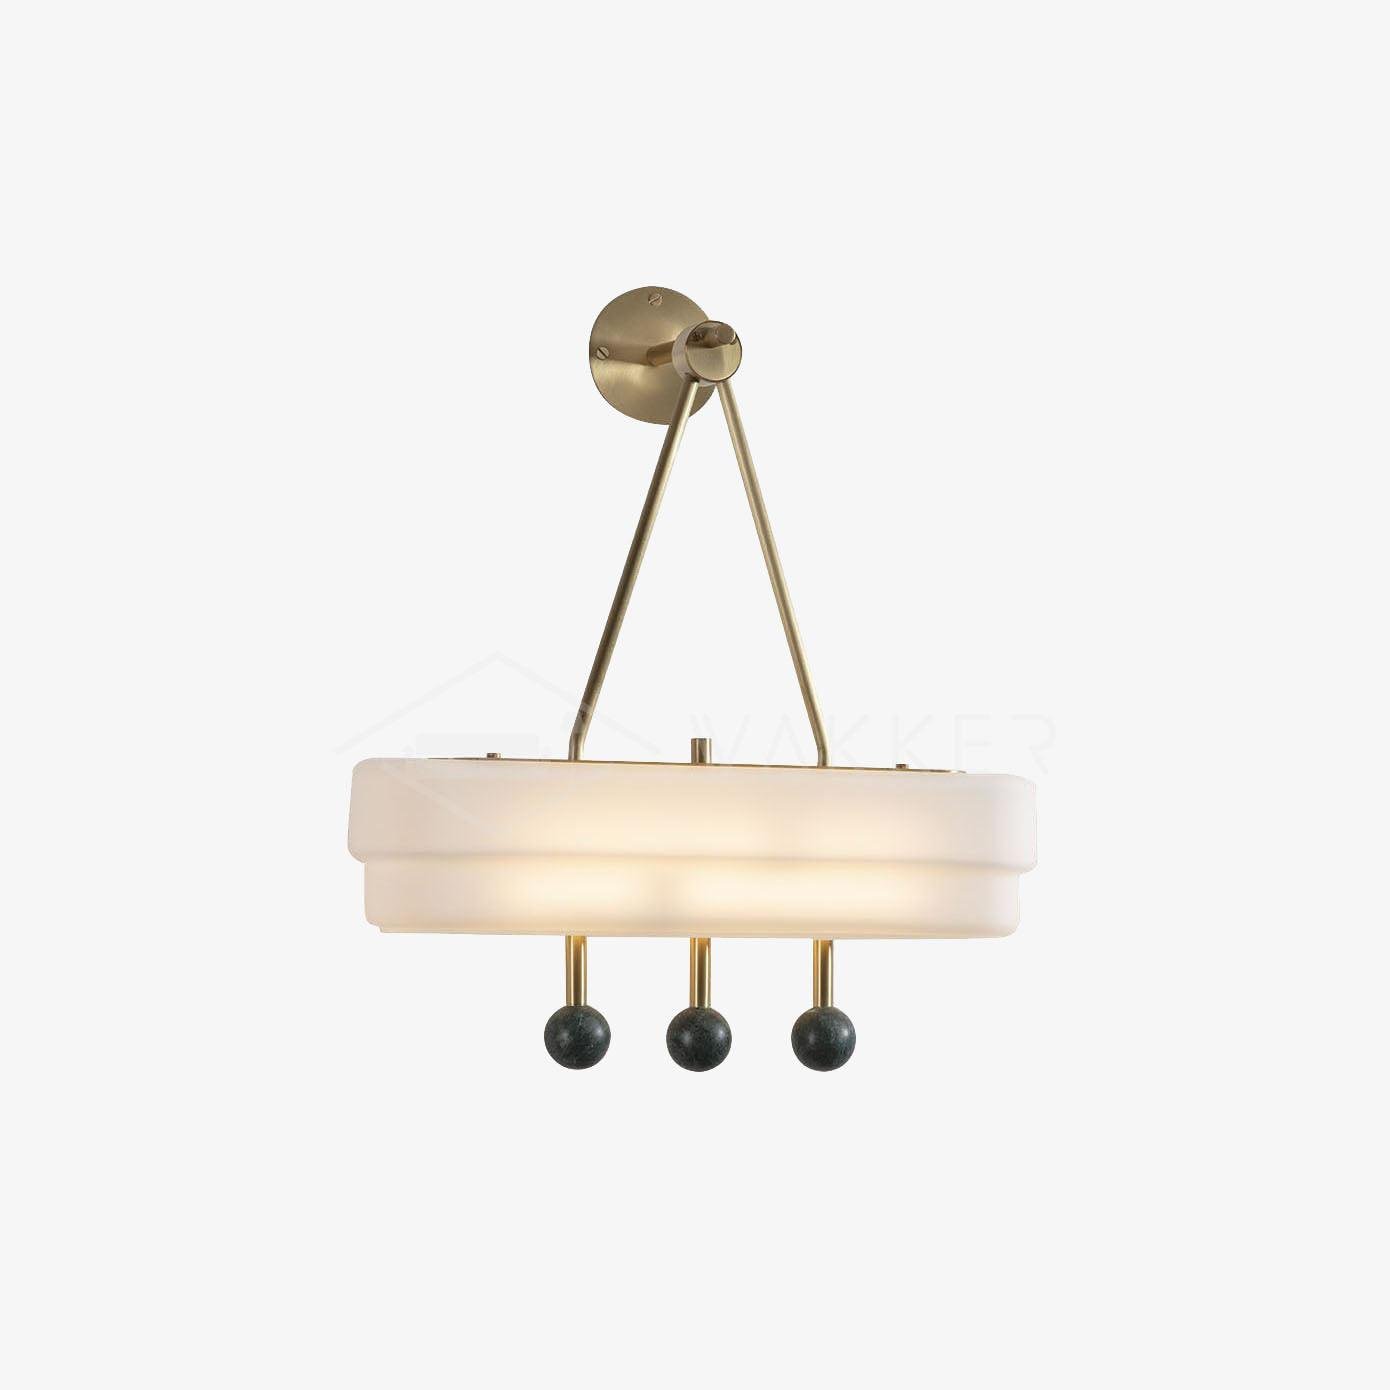 Spate Wall Light, Brushed Brass and Glass + Green Marble, Warm White, Diameter 40cm x Height 40cm, Set of 2